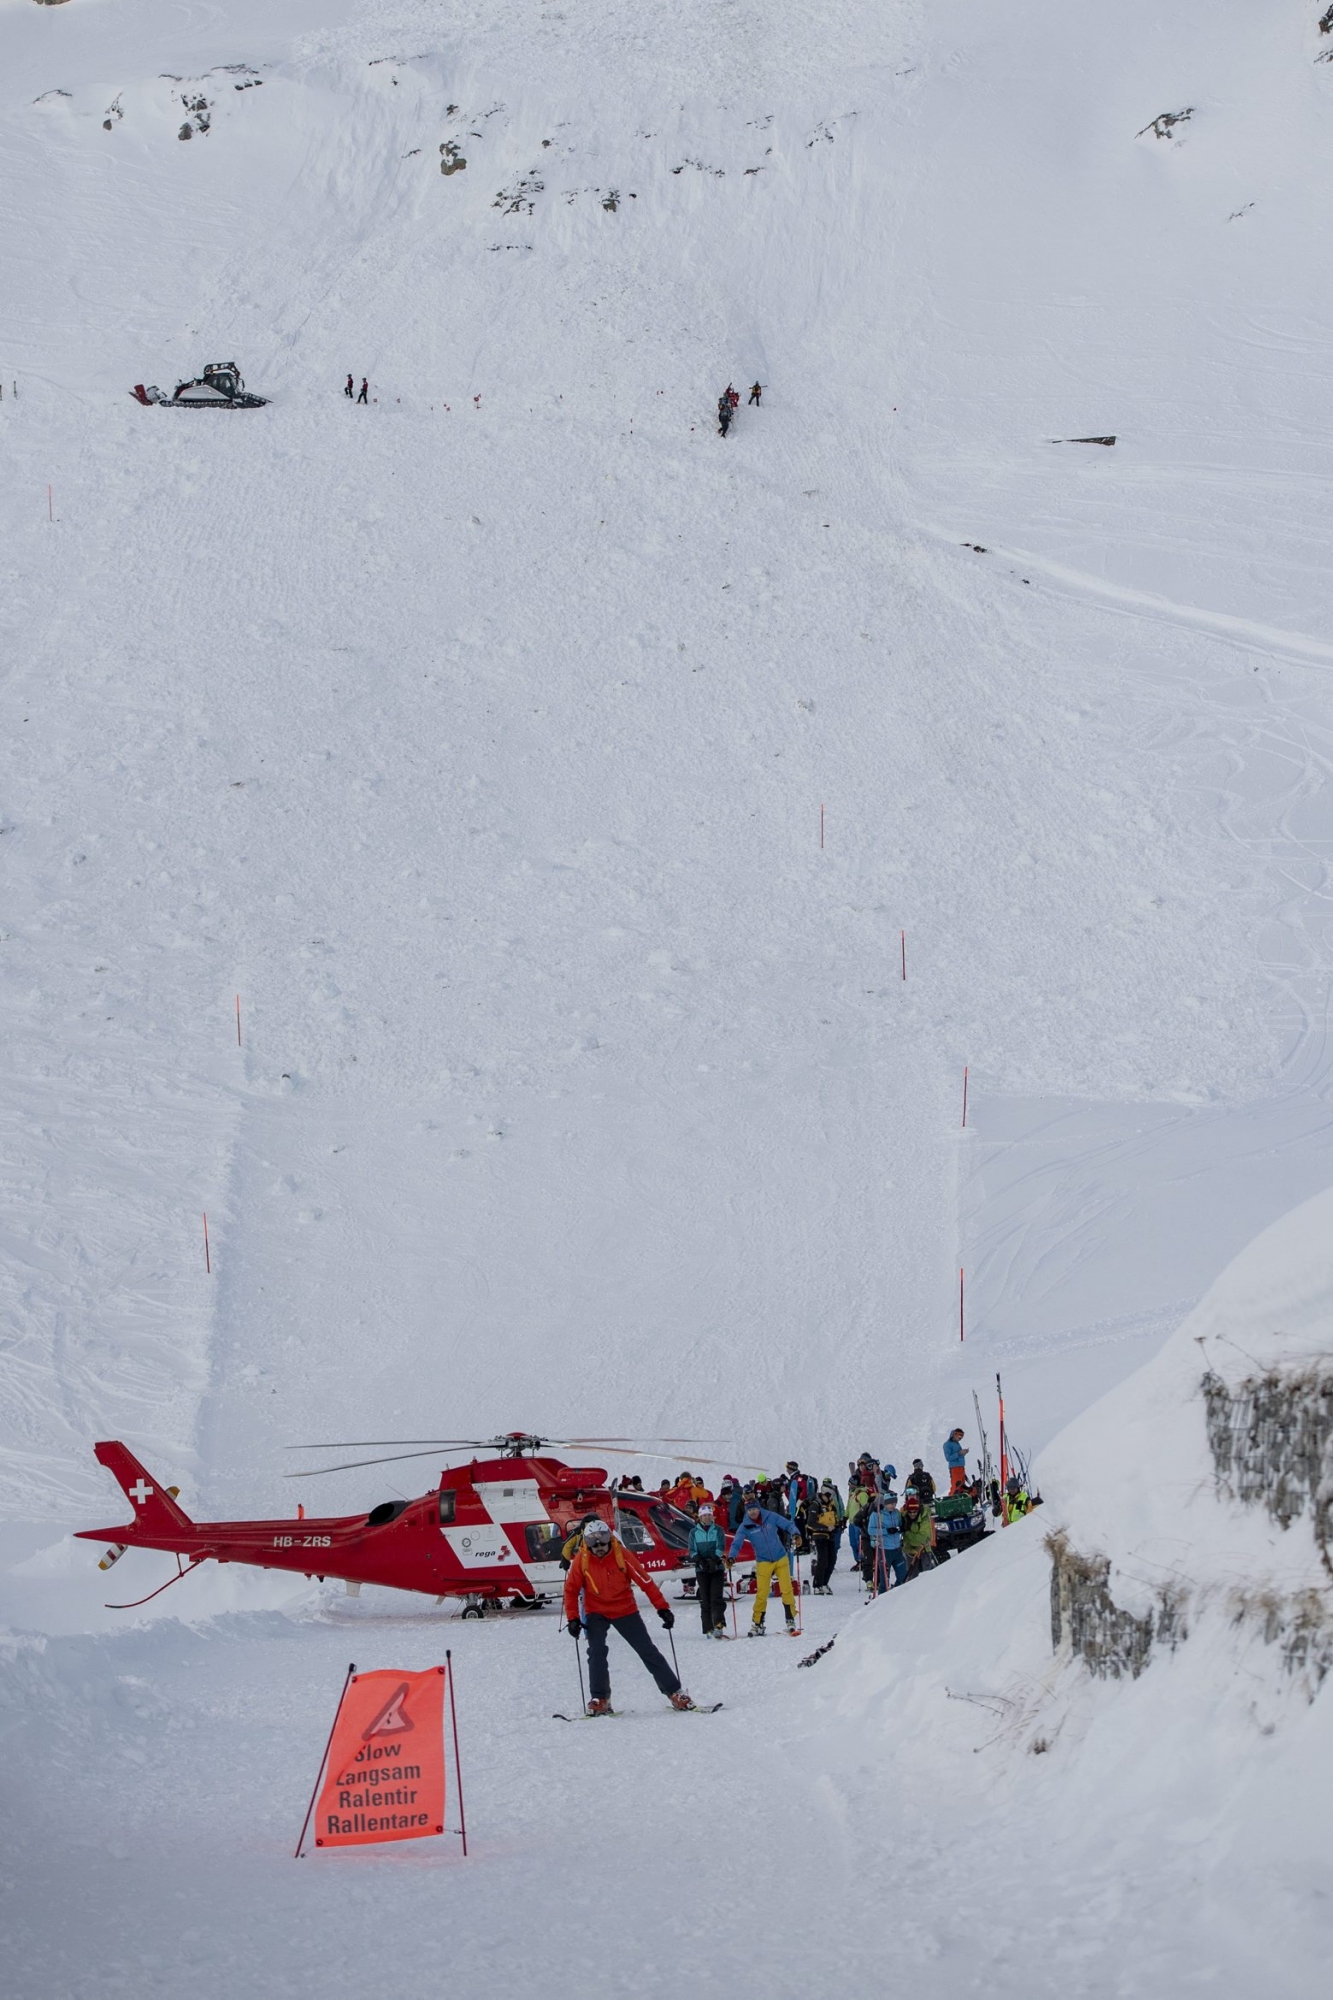 Rescue forces and helicopters still search for missed persons after an avalanche swept down a ski piste in the central town of Andermatt in canton Uri, Switzerland, Thursday, December 26, 2019. Six people have been rescued, two of them with minor injuries but cantonal authorities fear that several other people may be buried. An extensive rescue operation is underway. (KEYSTONE/Urs Flueeler) SWITZERLAND AVALANCHE